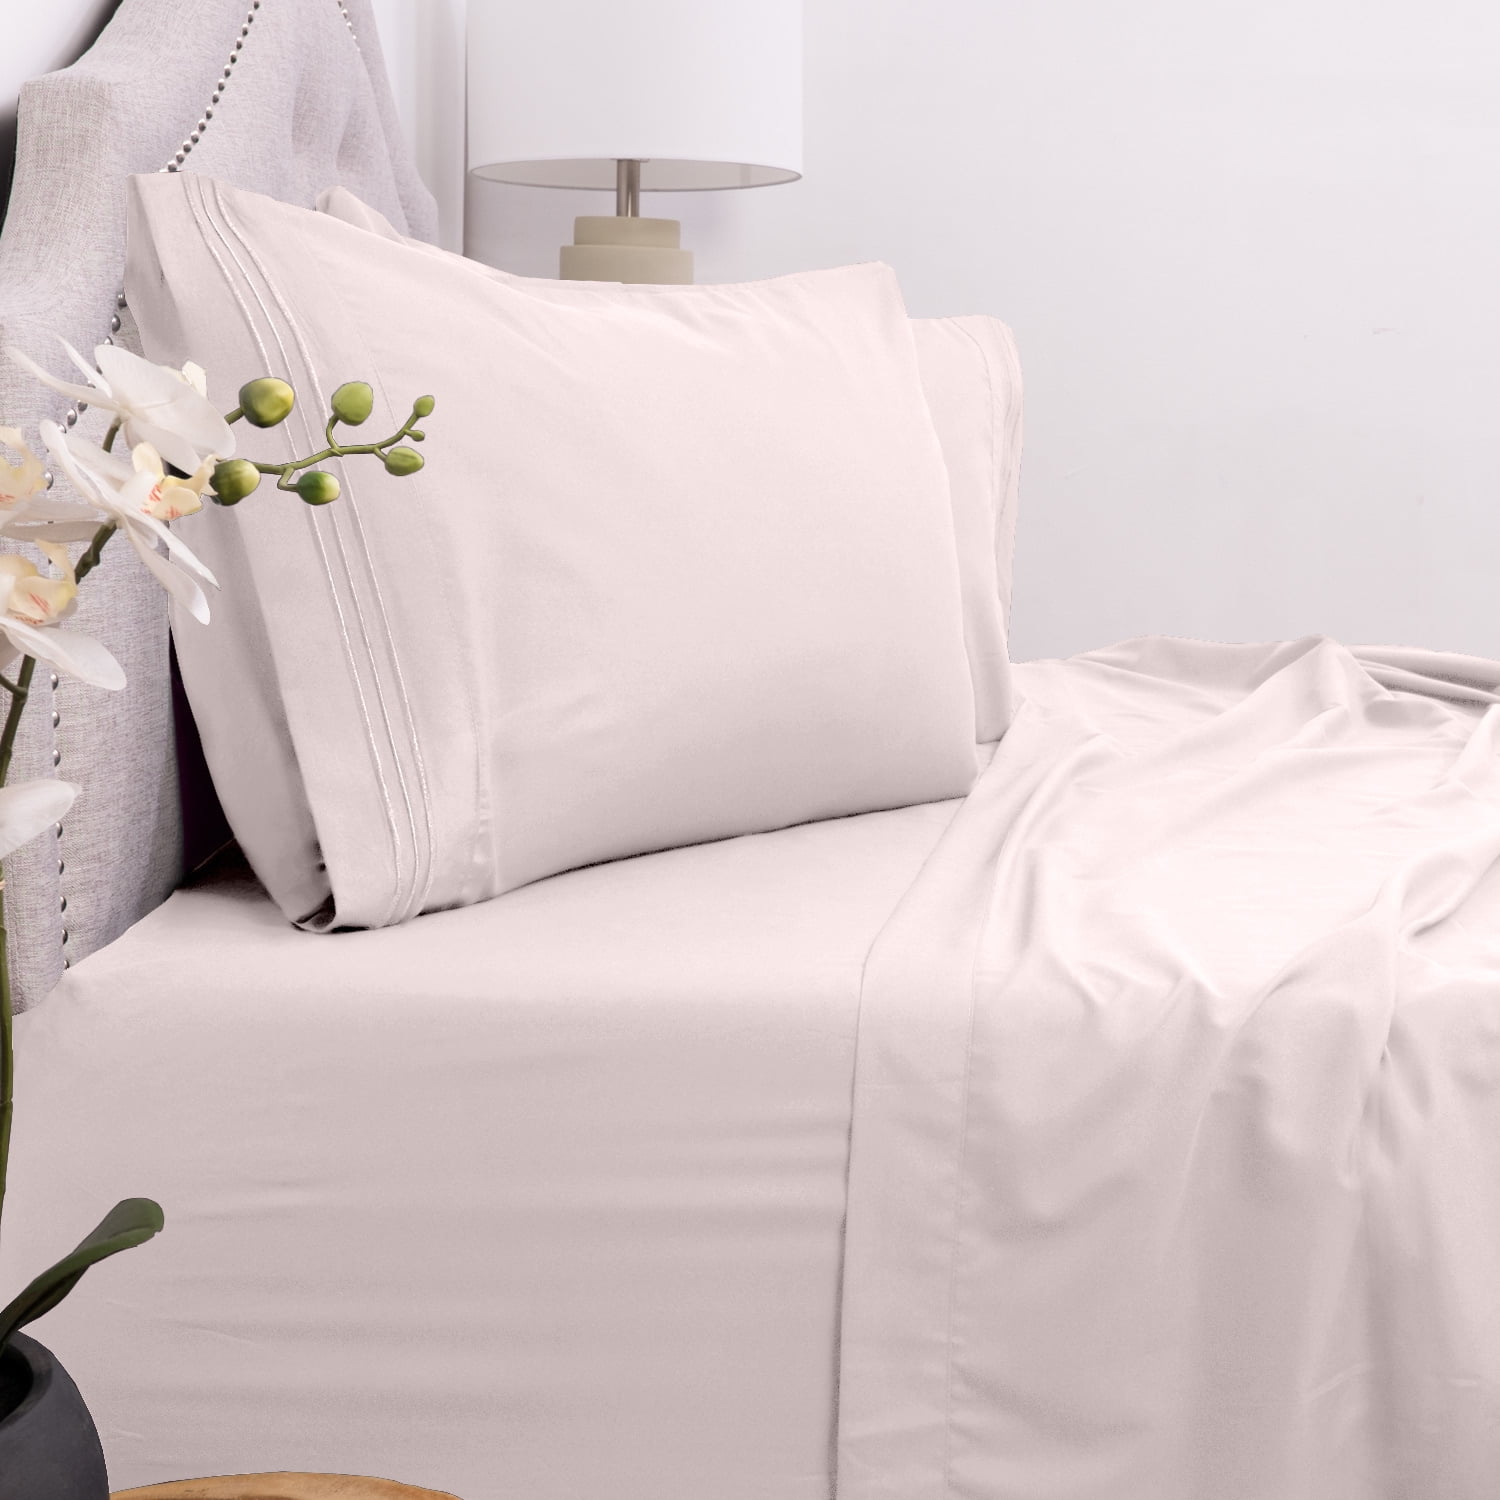 Details about   Deep Pocket Fitted Sheet 1000 Thread Count Egyptian Cotton Full Size All Colors 